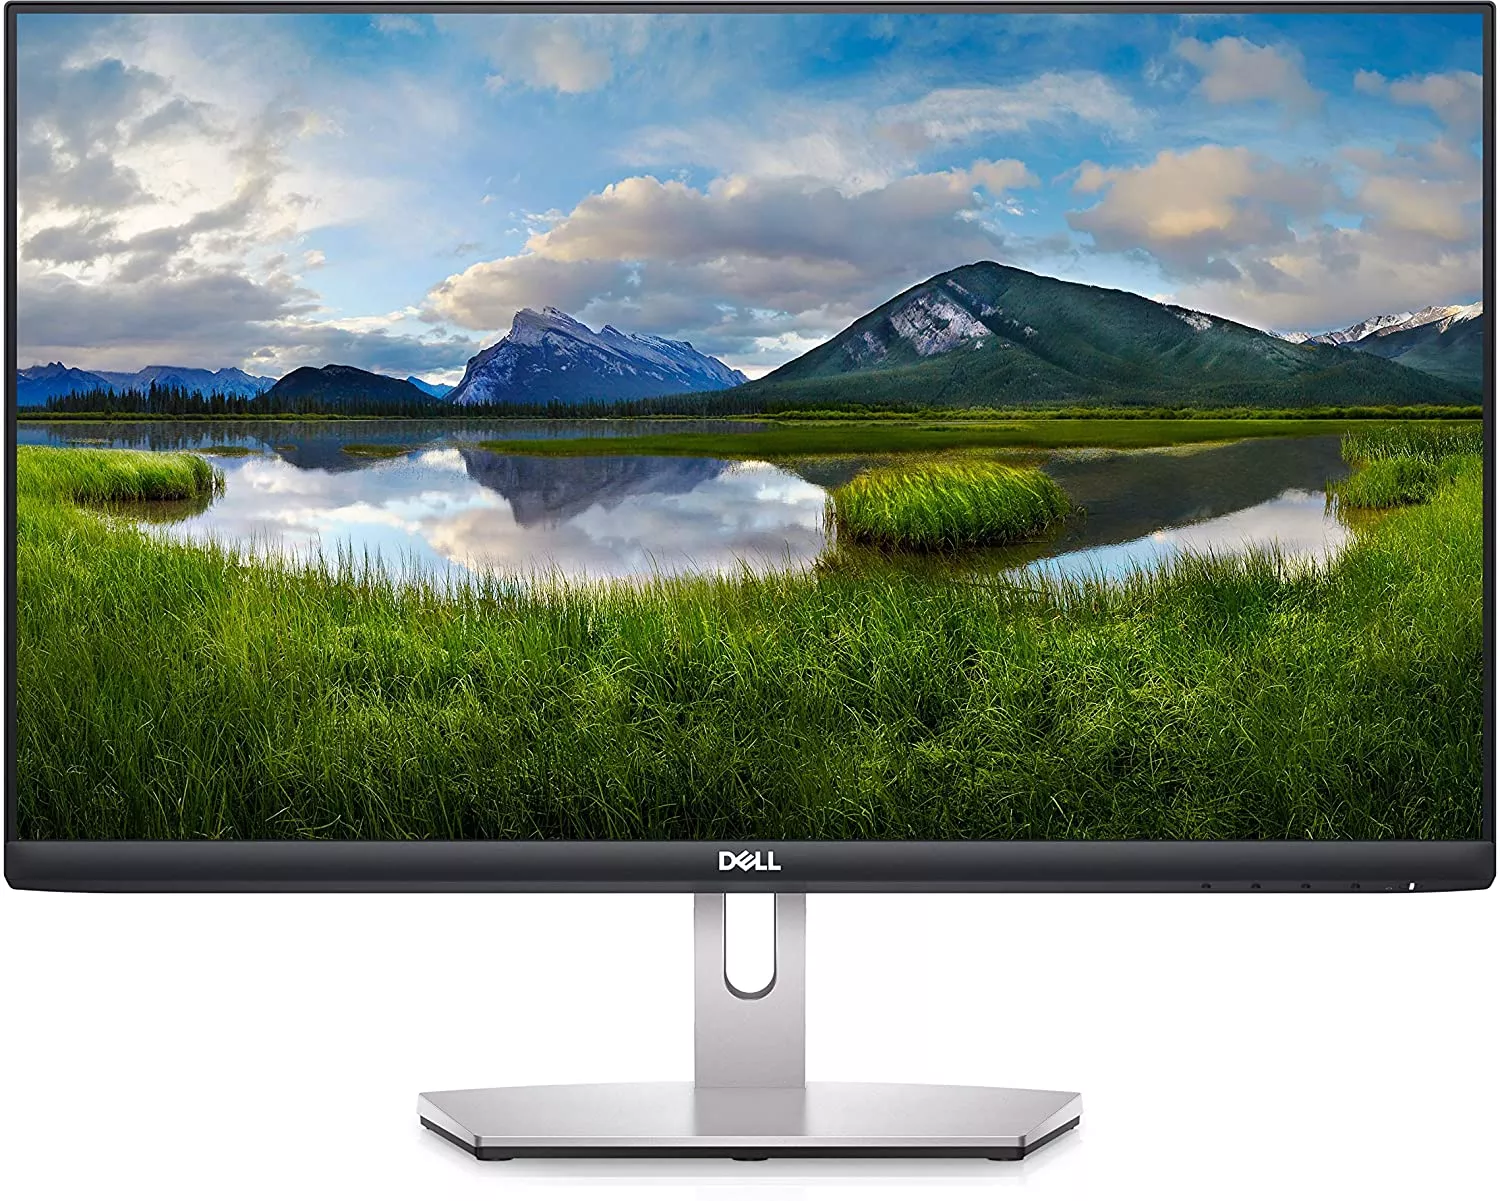   DELL S2421HN 24 INCH MONITOR WITH 2 HDMI PORTS REVIEW